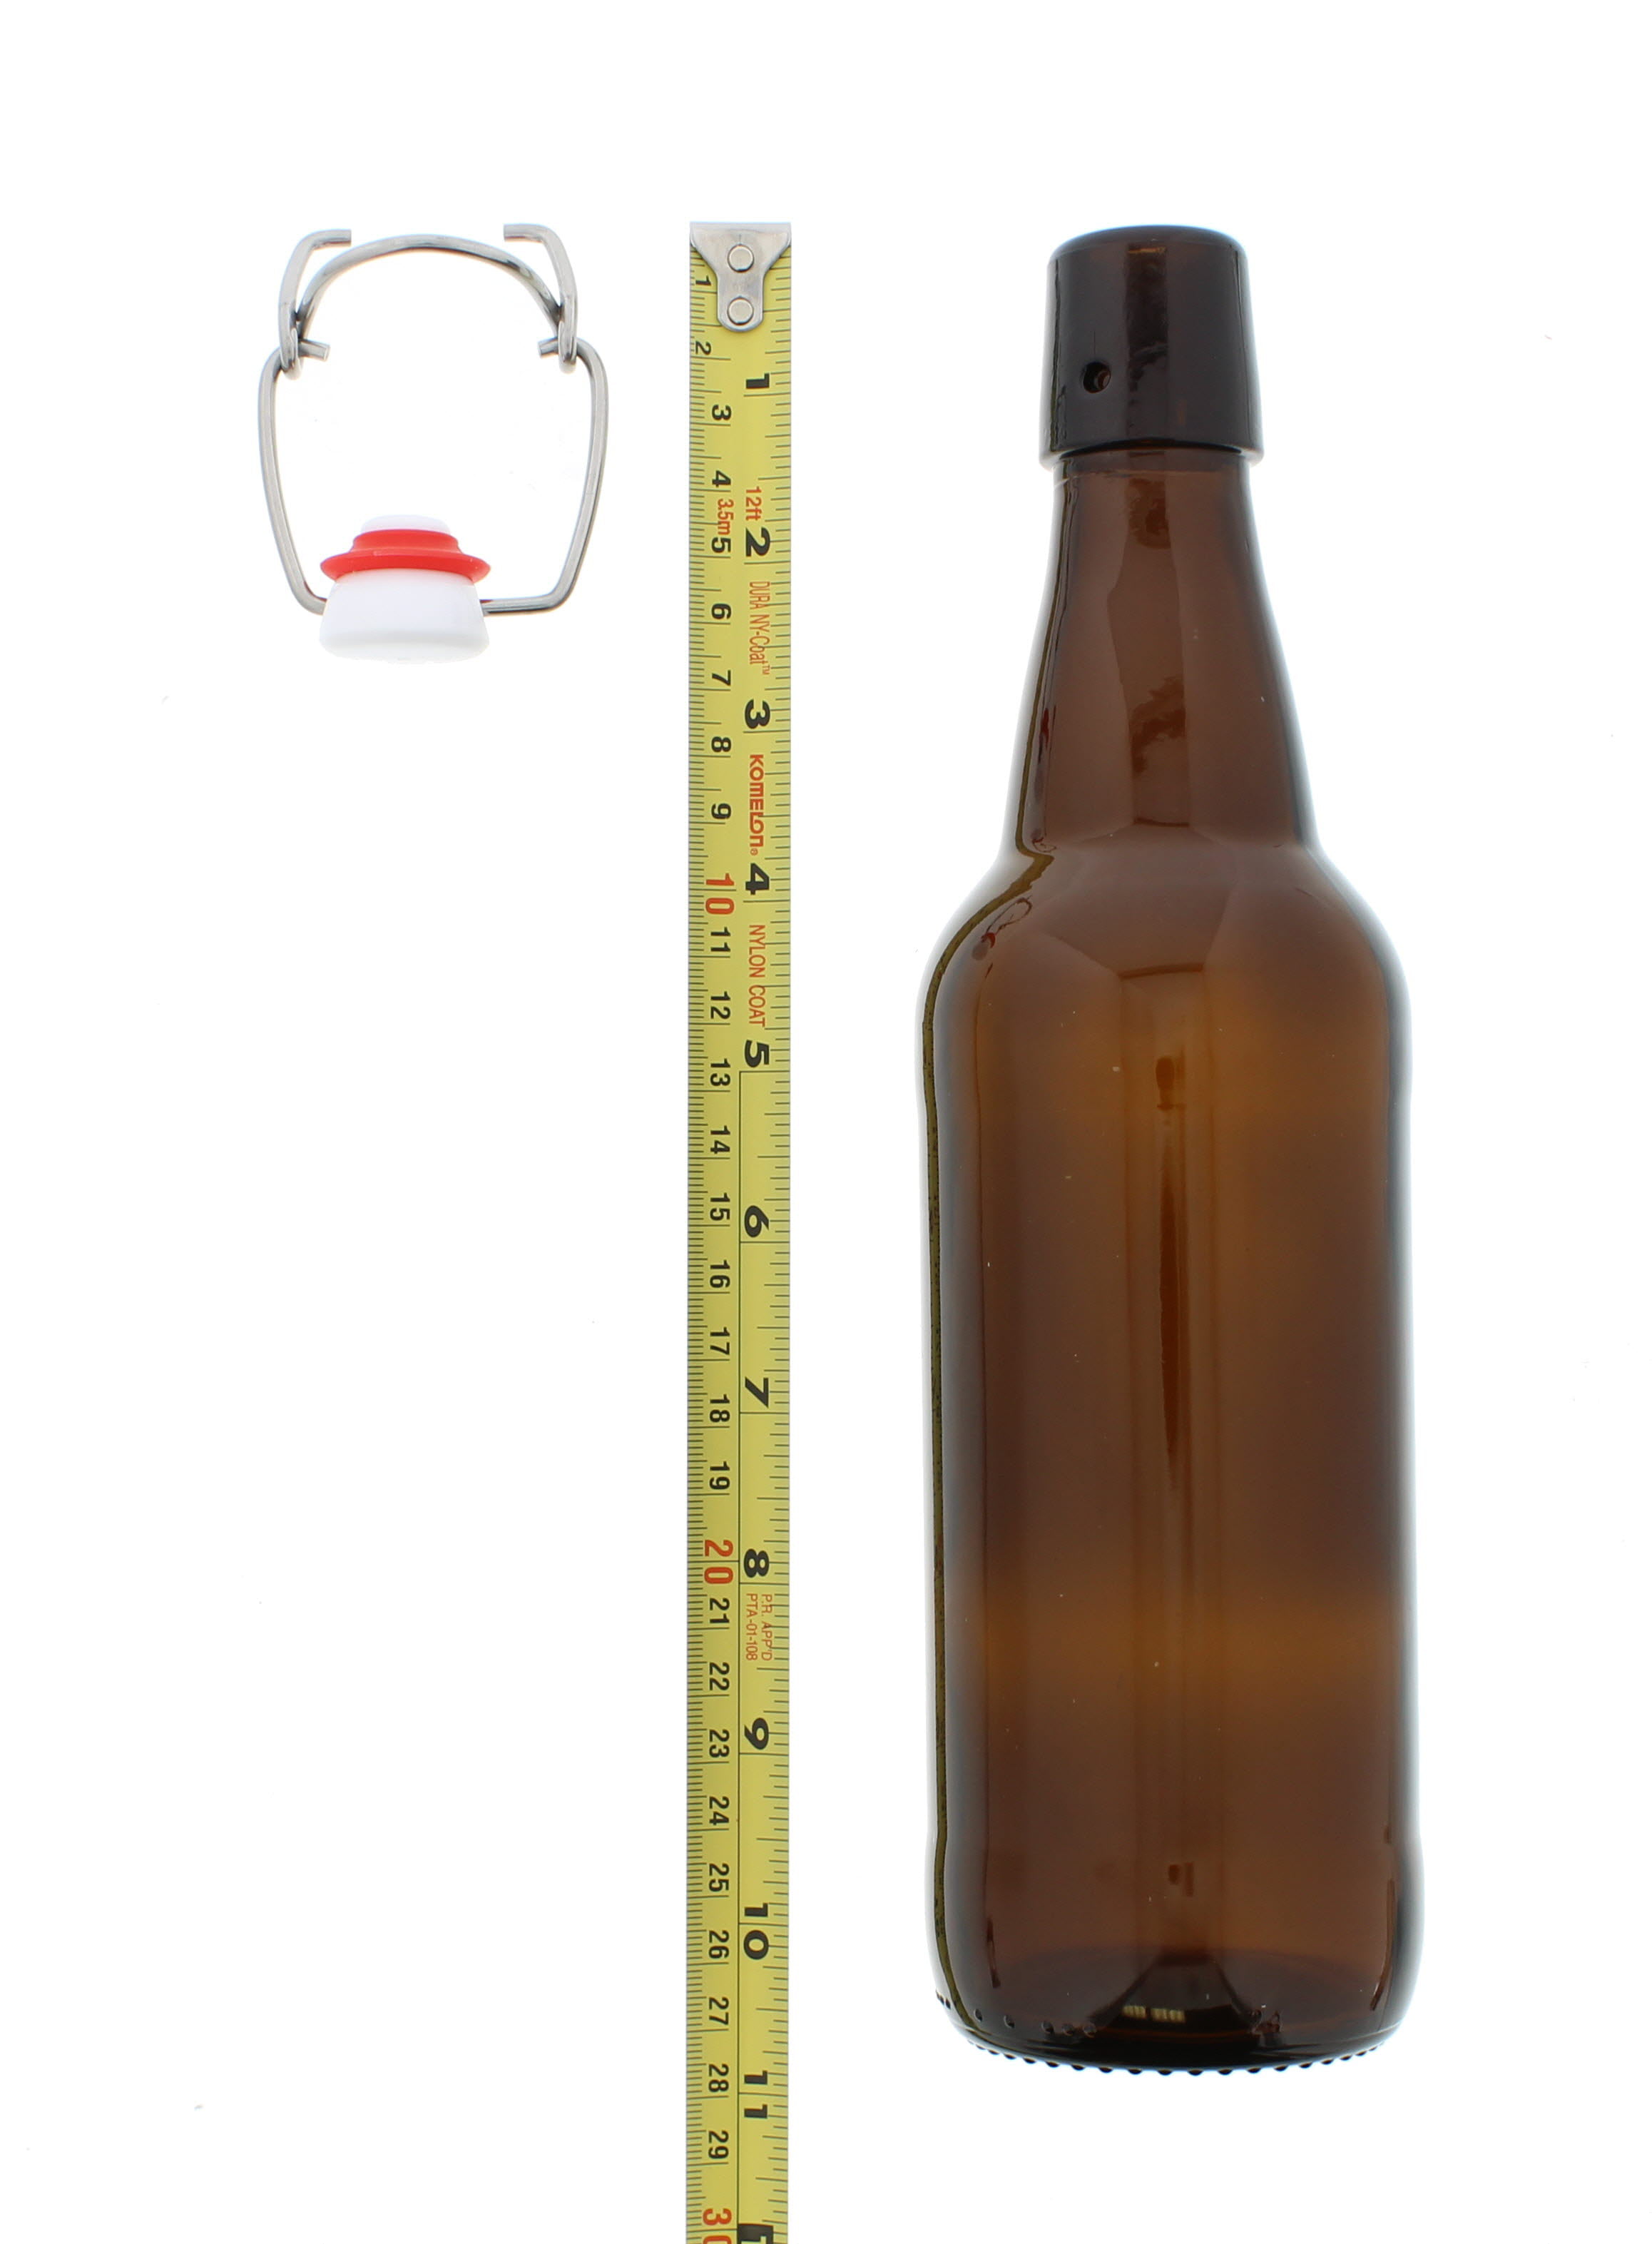 Juvale 6 Pack 16 oz Glass Bottles with Swing Top Lids and Square Base,  Includes Brush and Funnel for Homemade Brewing